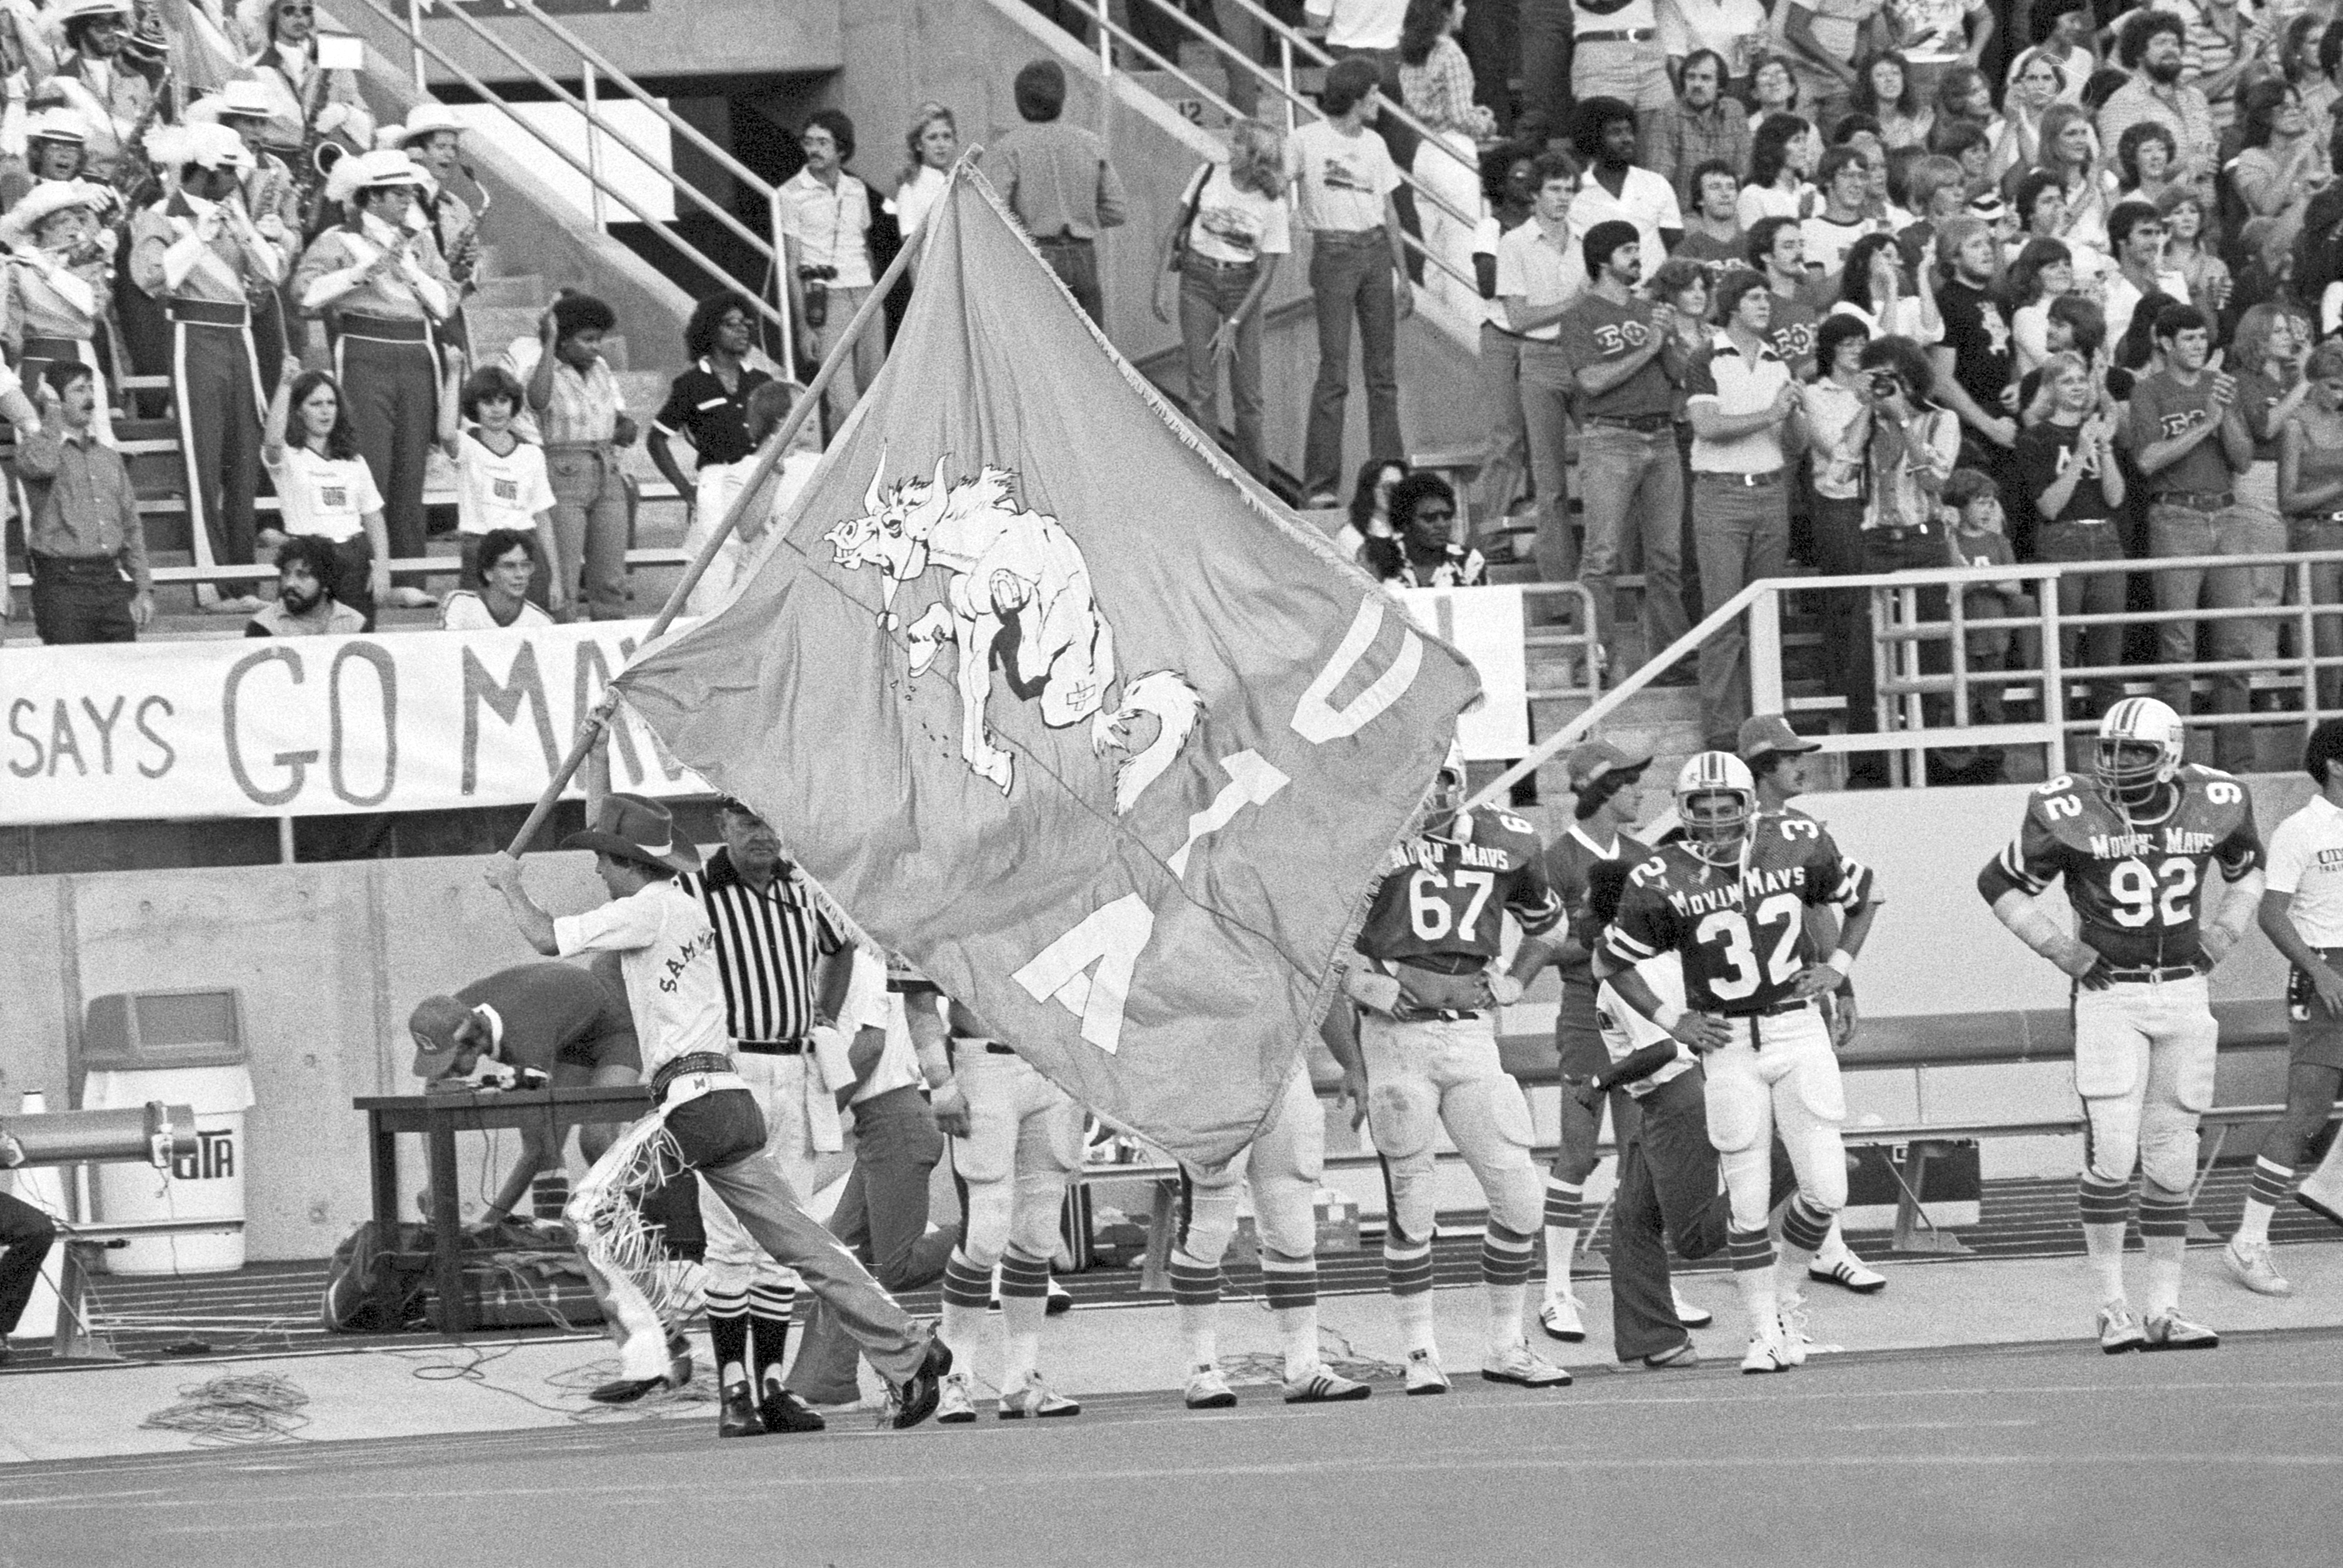 Man dressed in chaps and cowboy hat running with a large UTA flag while on the sidelines of a football game and a crowd is seen in the background.